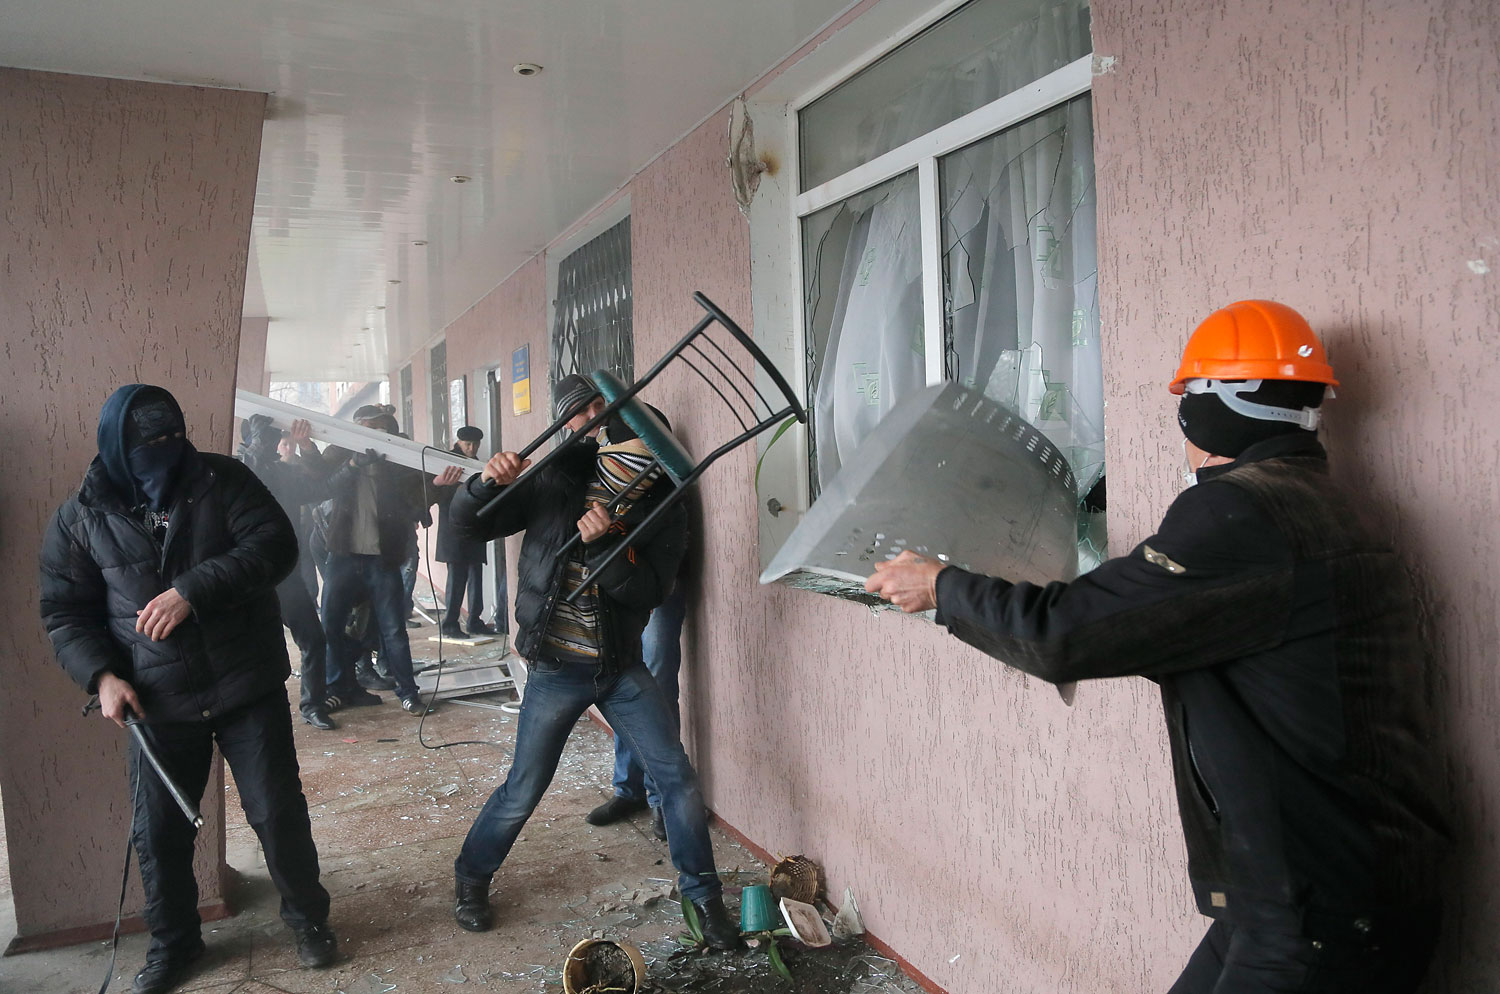 Pro-Russian men storm a police station in the eastern Ukrainian town of Horlivka on April 14, 2014.